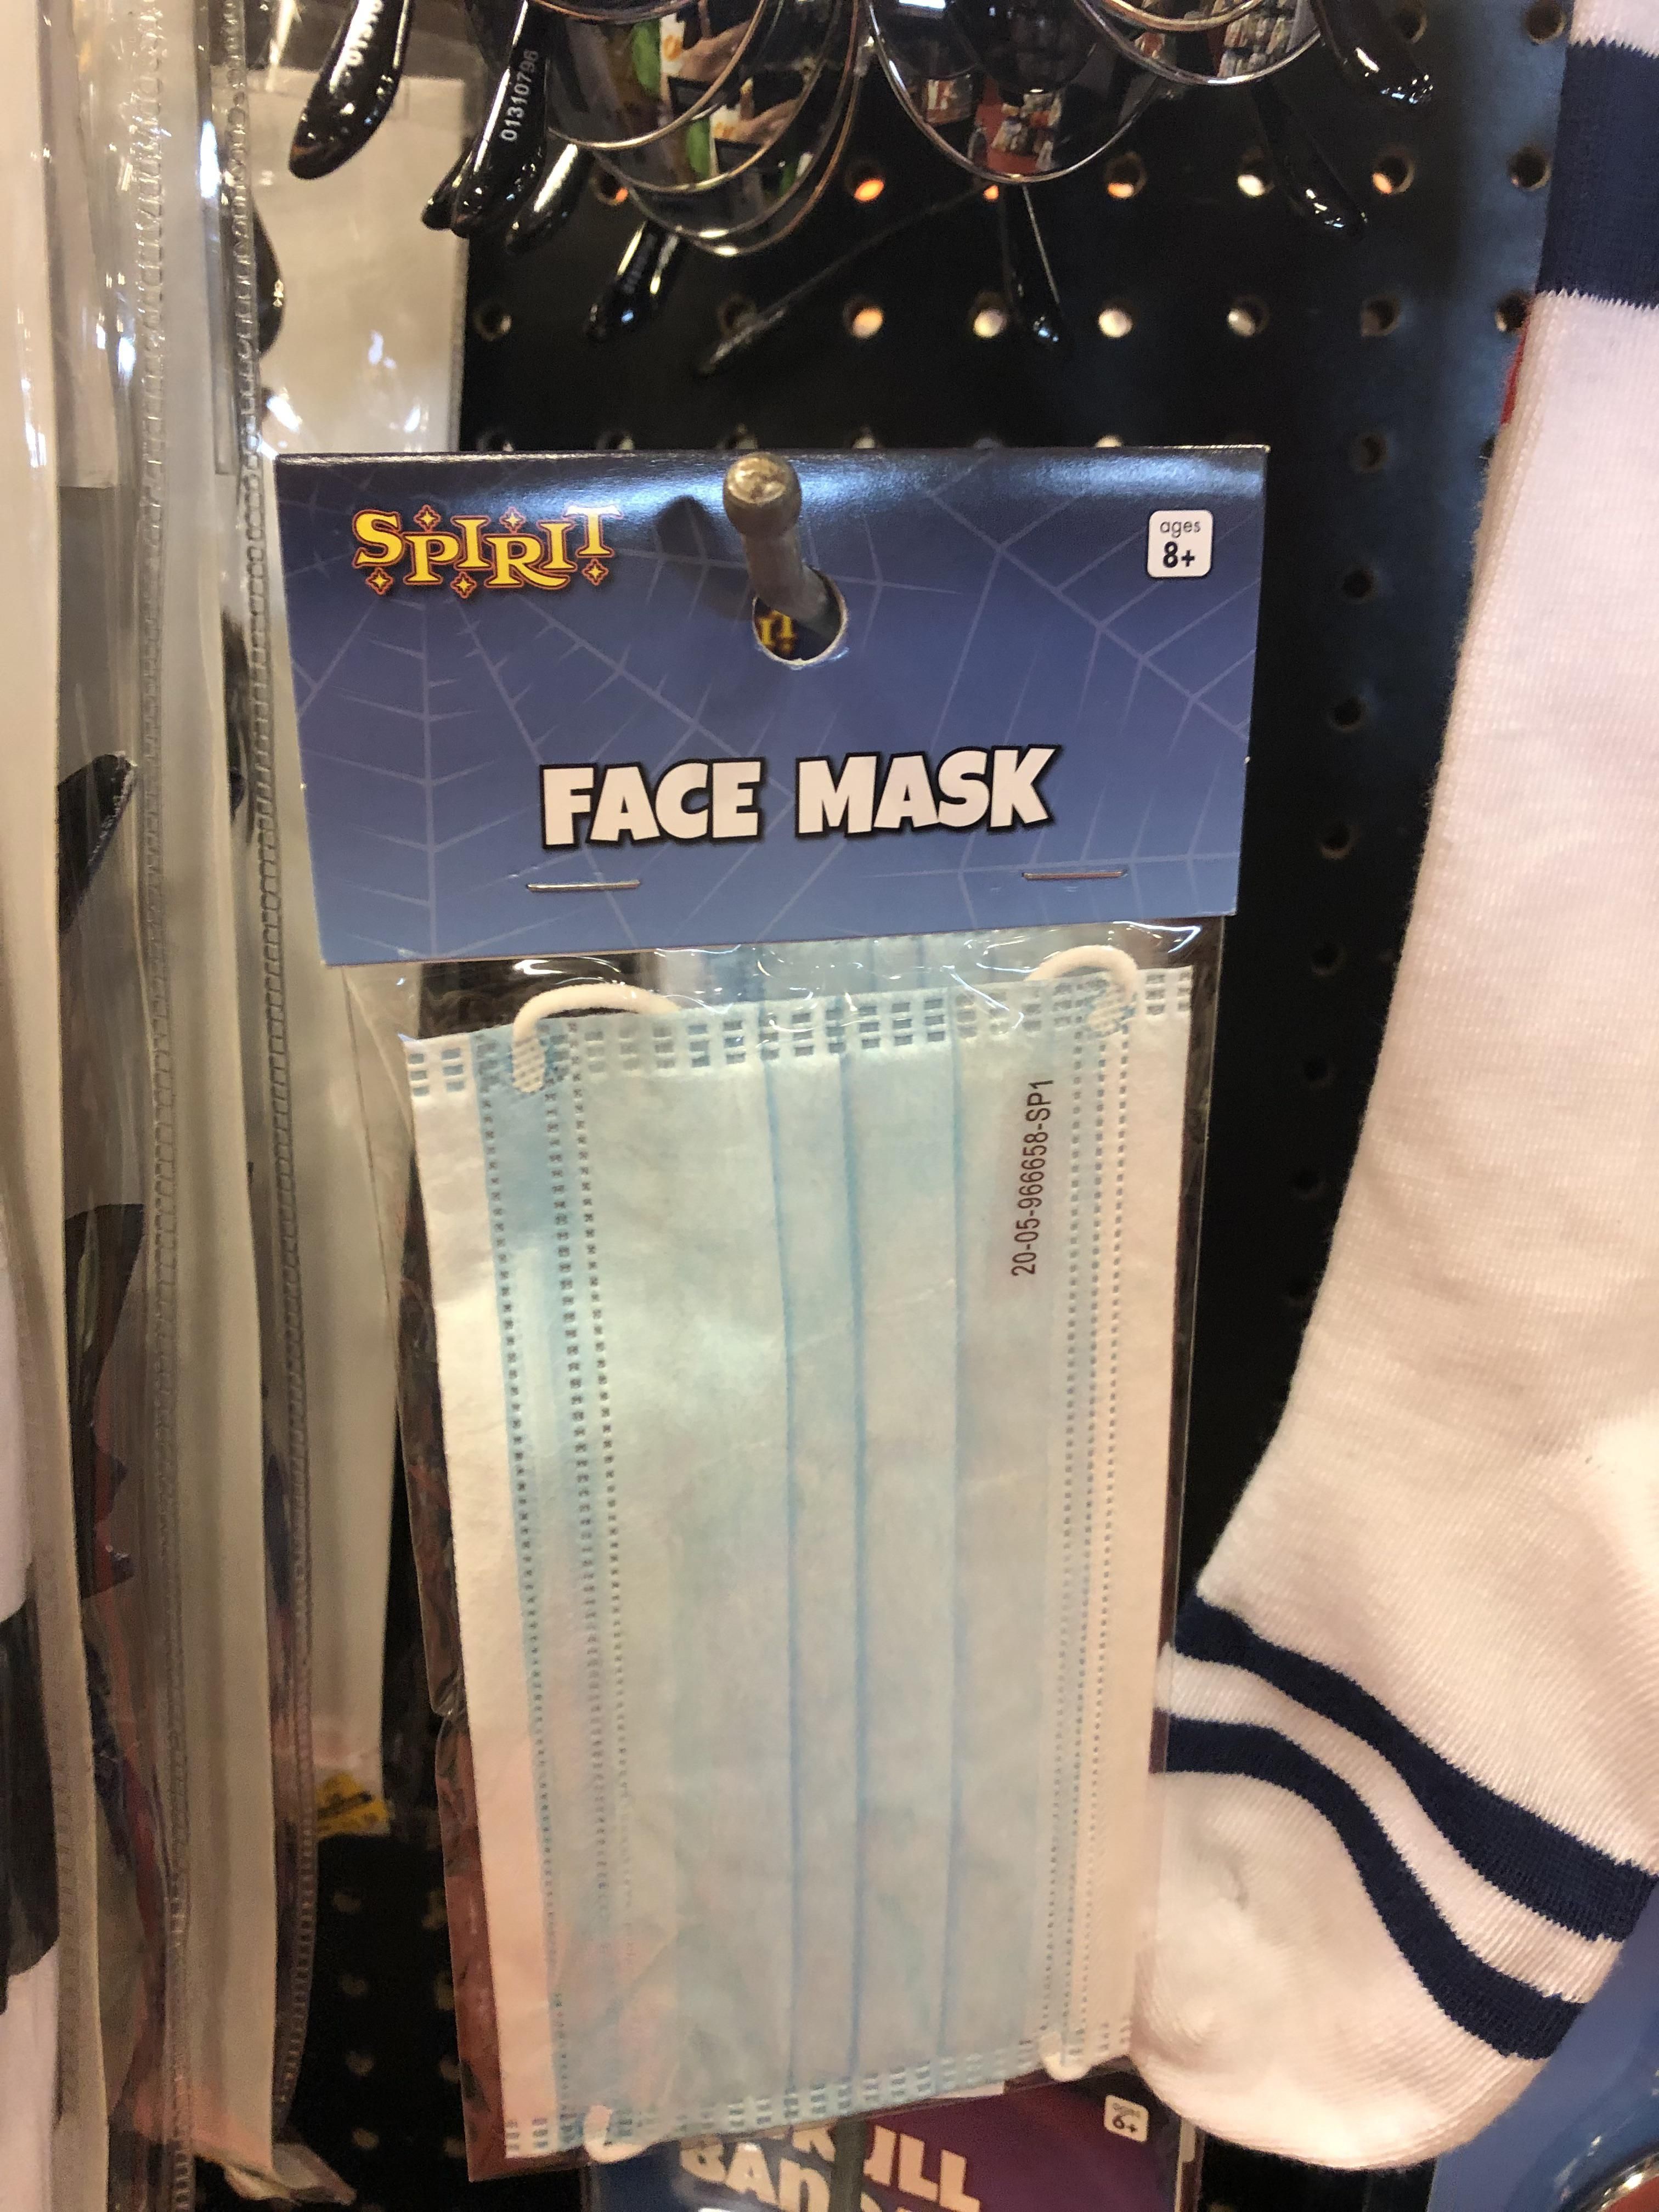 Halloween store selling a single disposable face for $4.